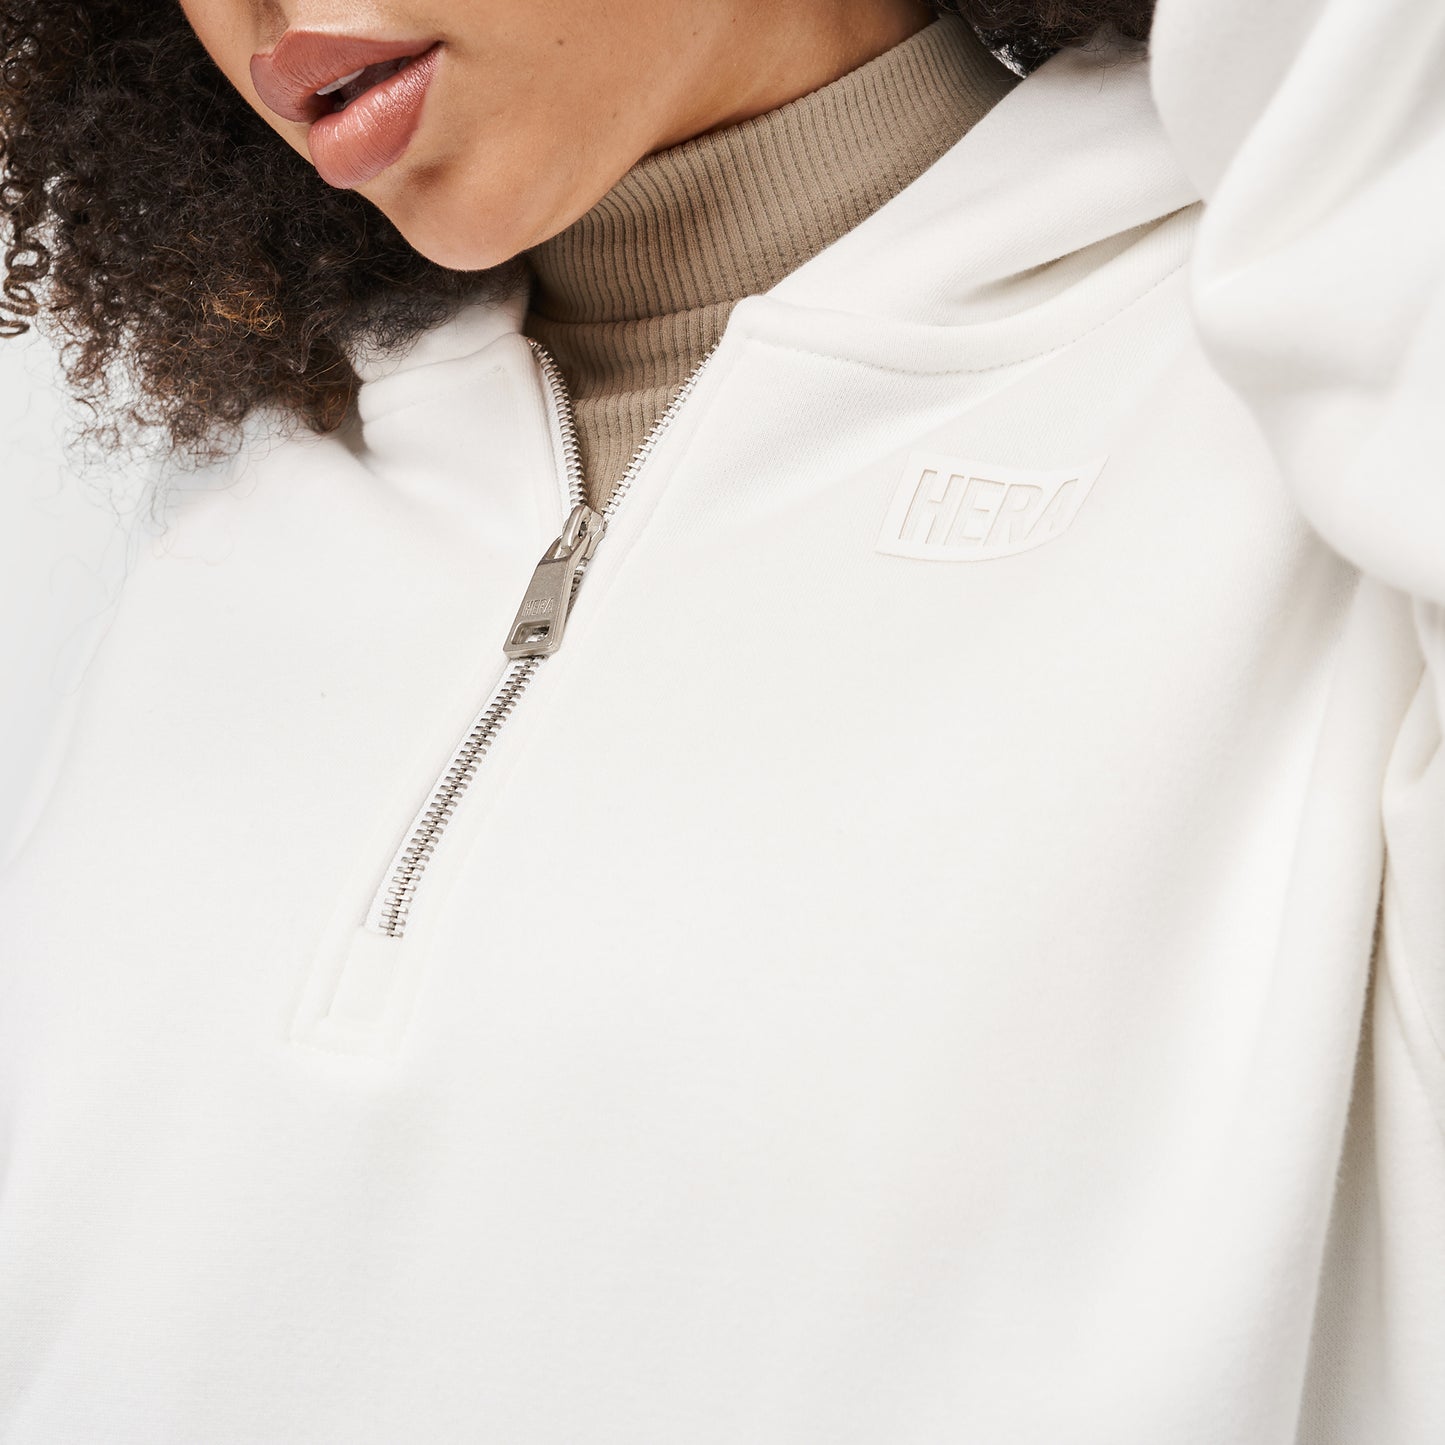 Womens Collective Hoodie - Off White